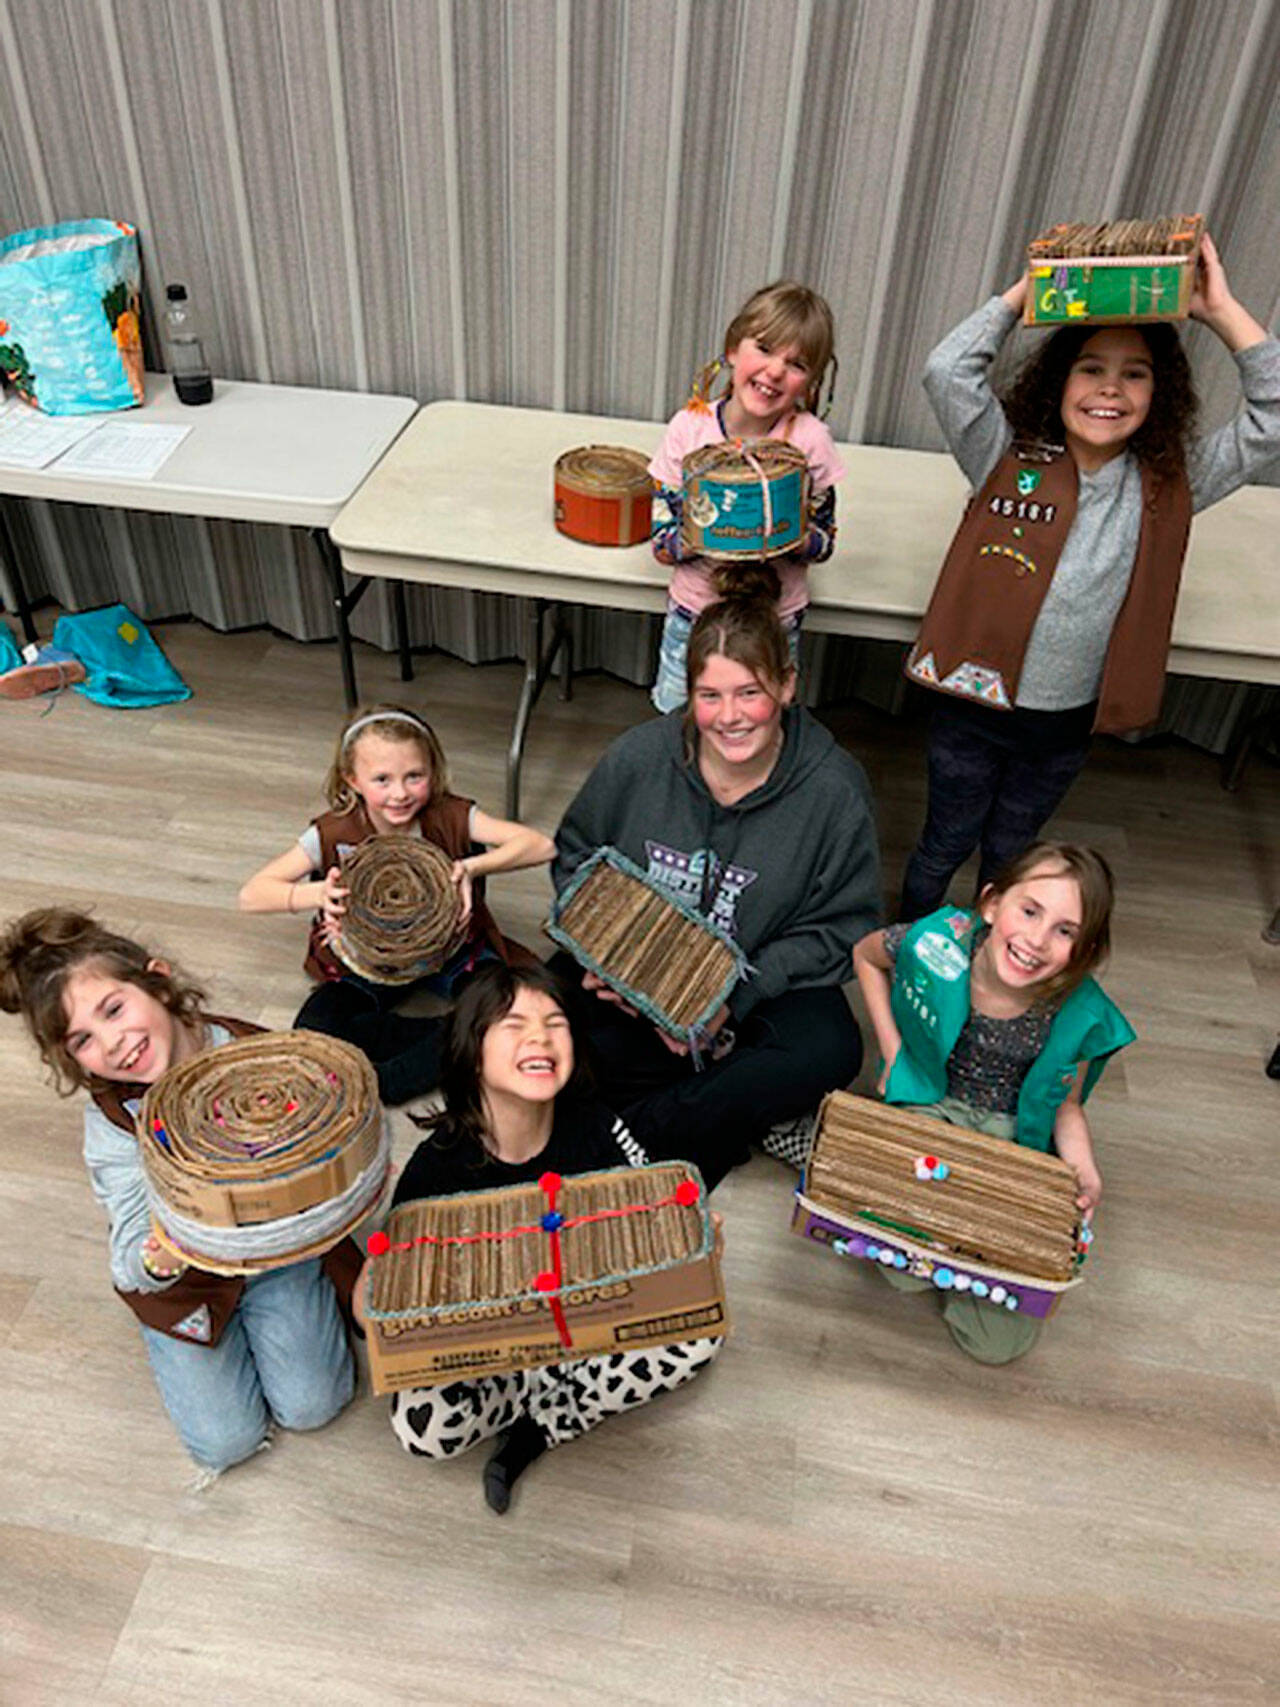 Photo courtesy Heidi Krzyworz
Girls Scouts with Troop 45181 complete making cat scratchers on March 6 from cookie boxes for Kitty City. Scouts include, from back left, Iris Carlquist-Bundy, Indira Reichner; center left, Malta Bushy, Skylar Krzyworz; front left, Lena Hanshaw, Sammy Nicholson, and Ember Hanshaw.